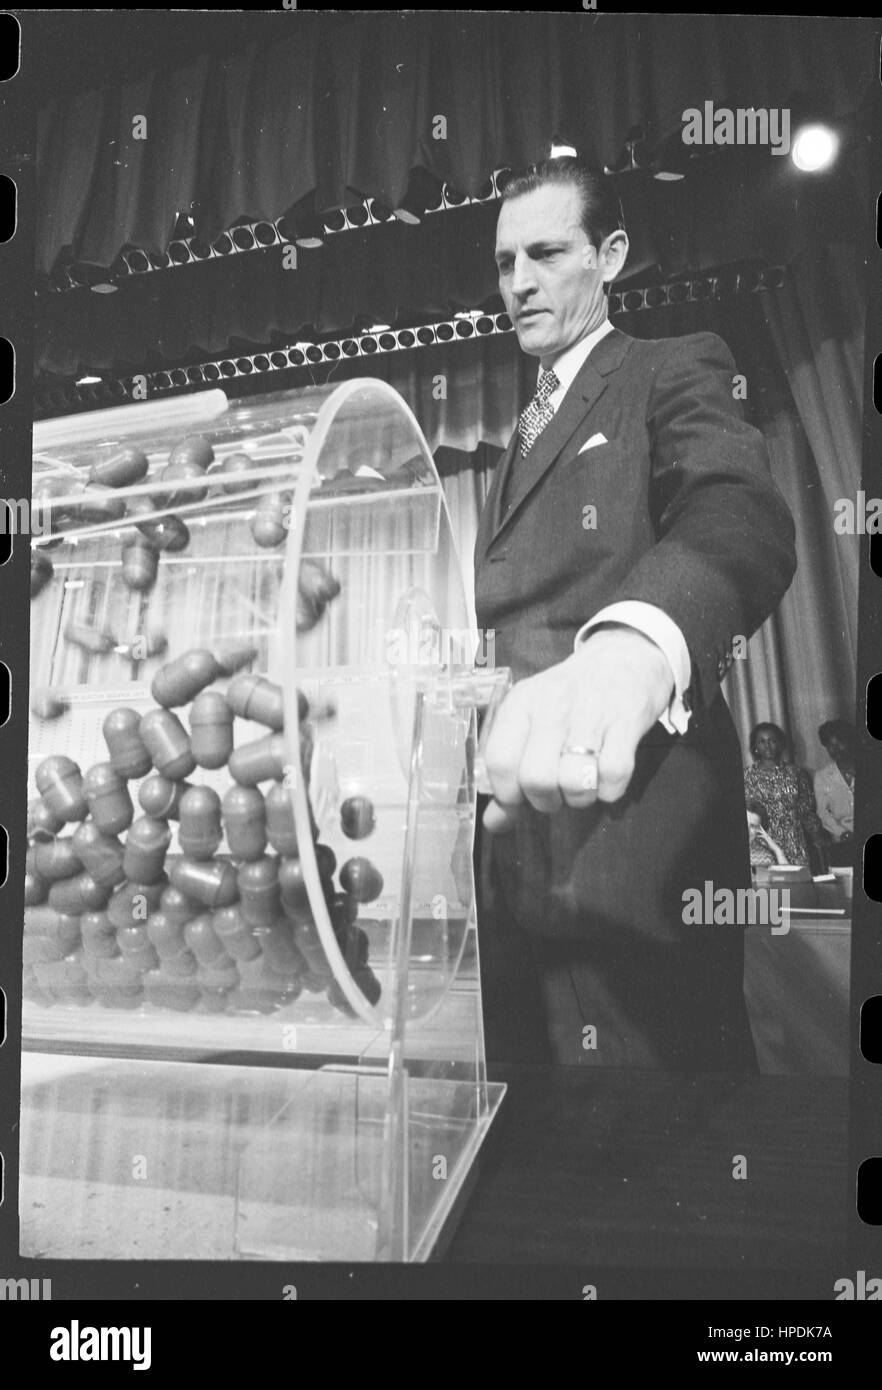 Curtis W Tarr, director of the Selective Service System, turns the drum containing capsules of draft numbers at the annual draft lottery, Washington, DC, 02/02/1972. Stock Photo